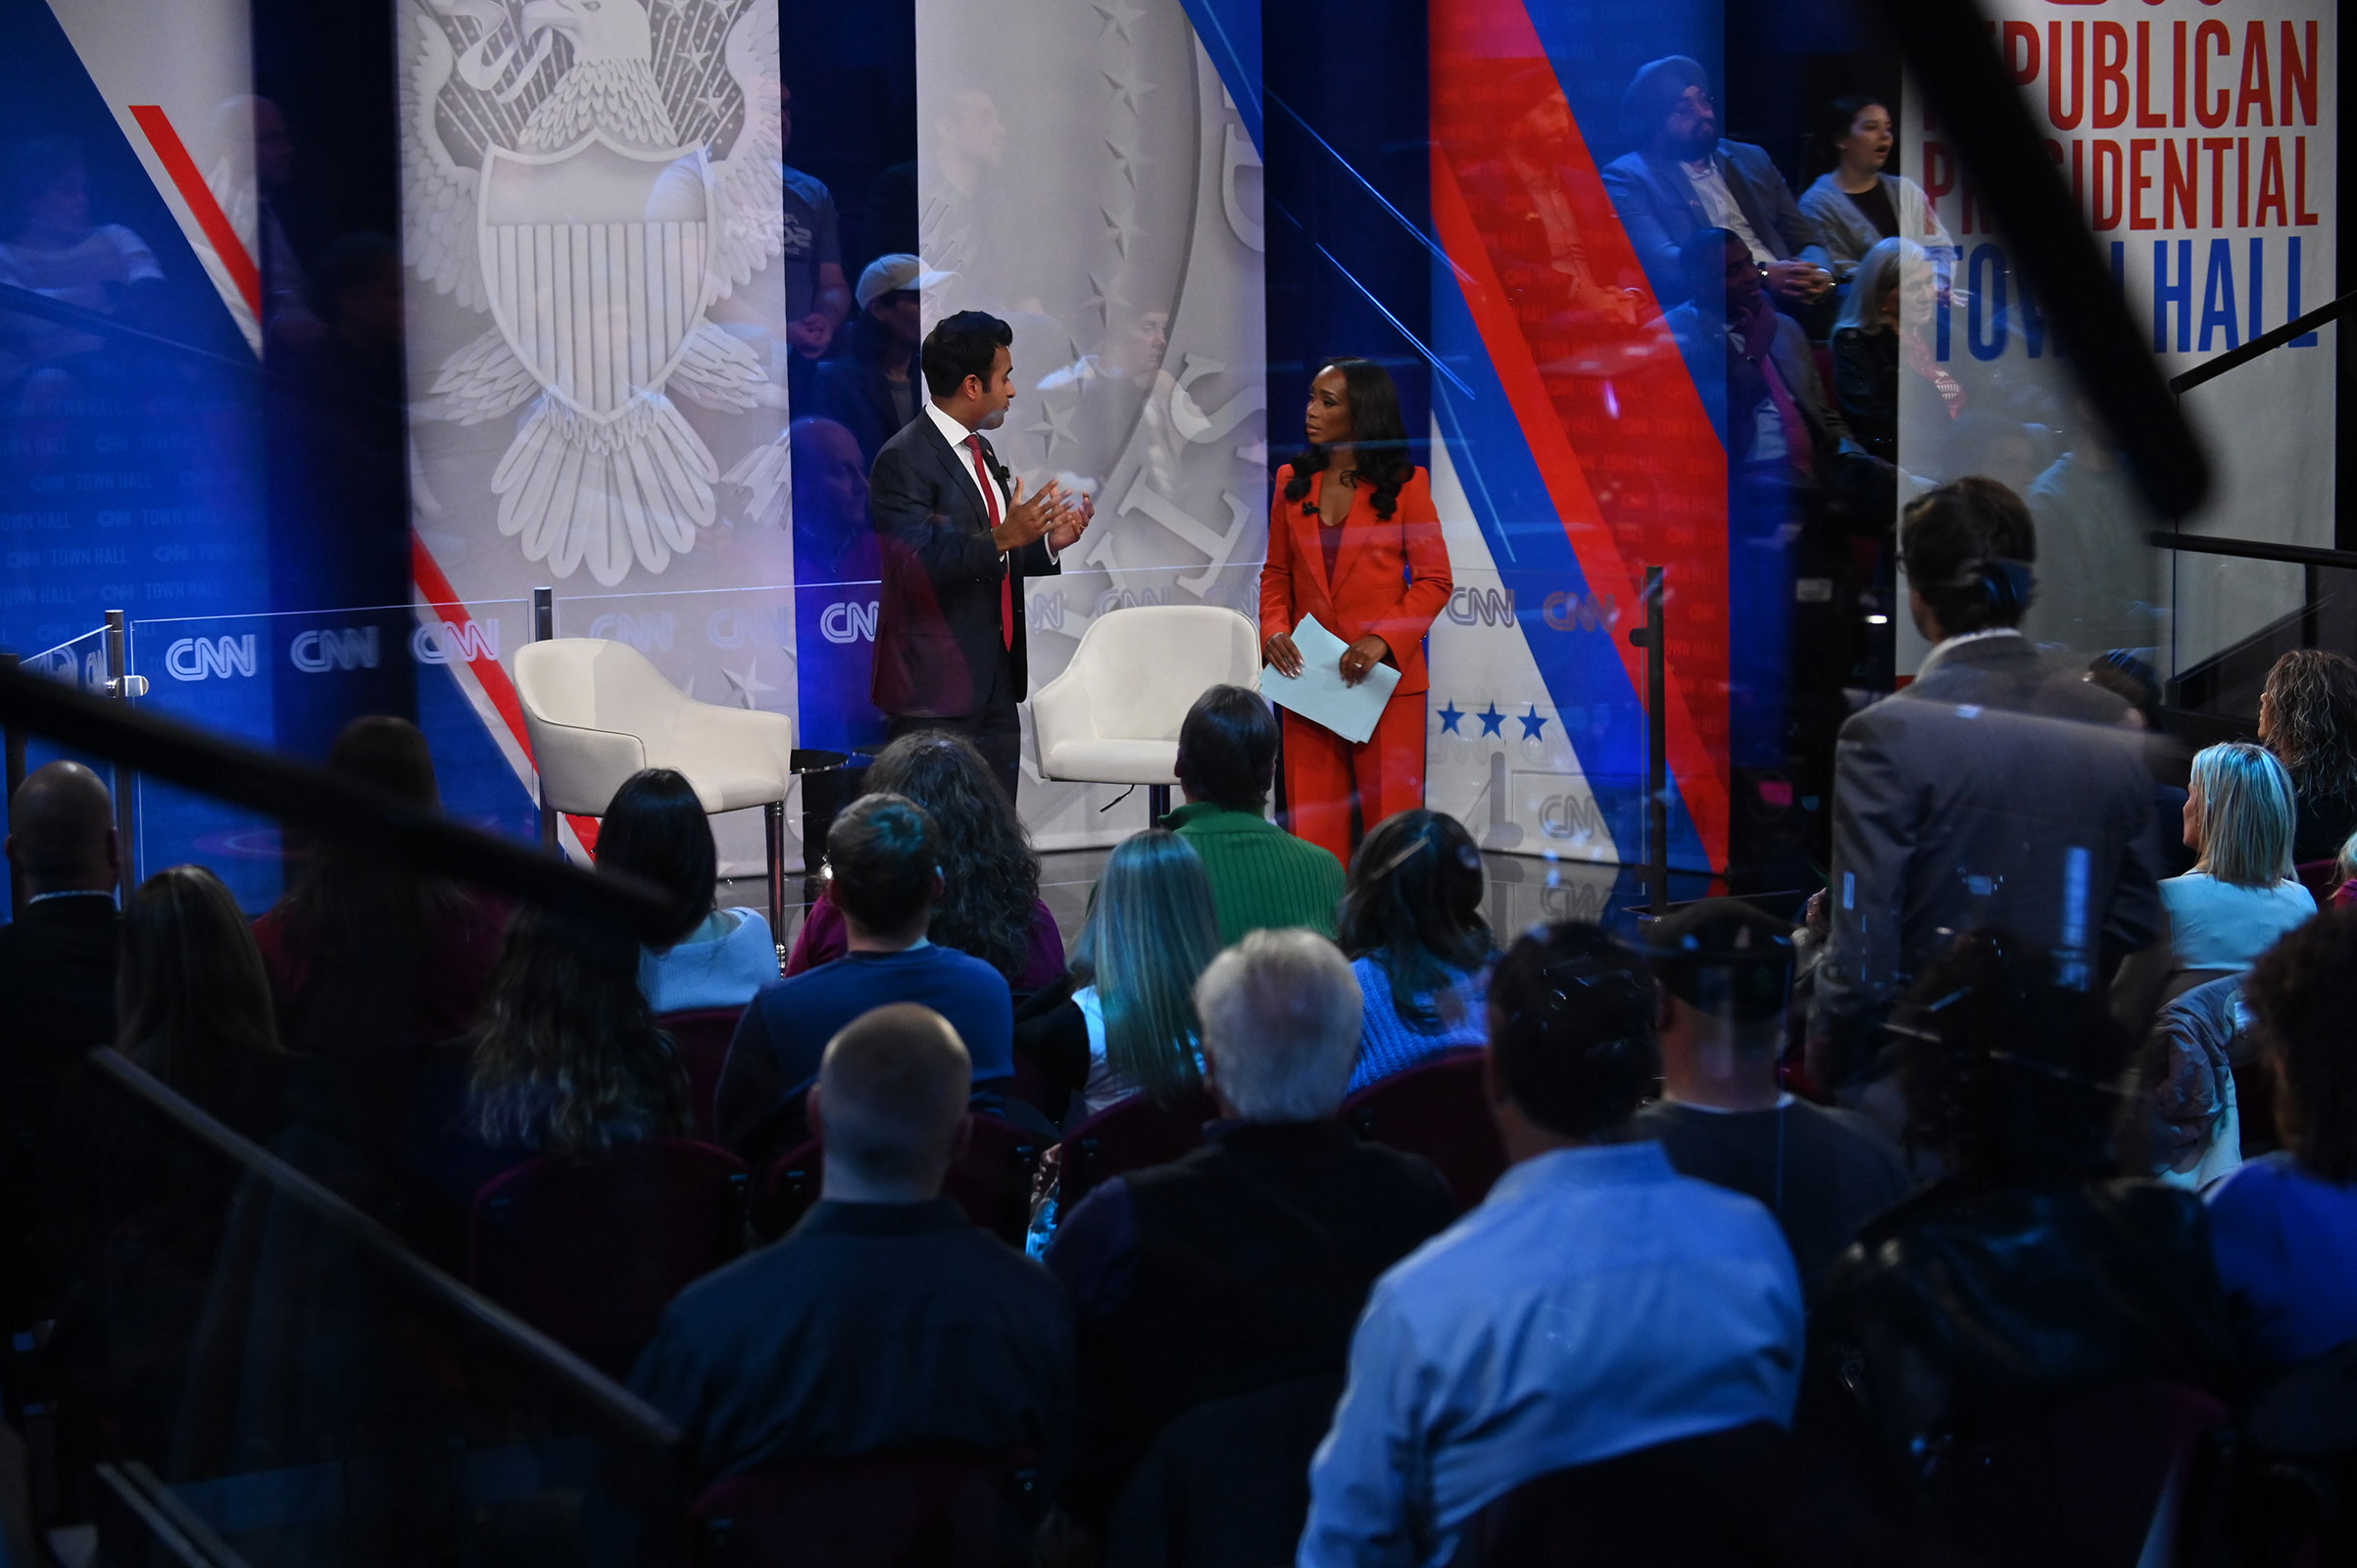 Republican presidential candidate Vivek Ramaswamy participates in a CNN Republican Town Hall moderated by CNN’s Abby Phillip at Grand View University in Des Moines, Iowa, on Wednesday, December 13, 2023.